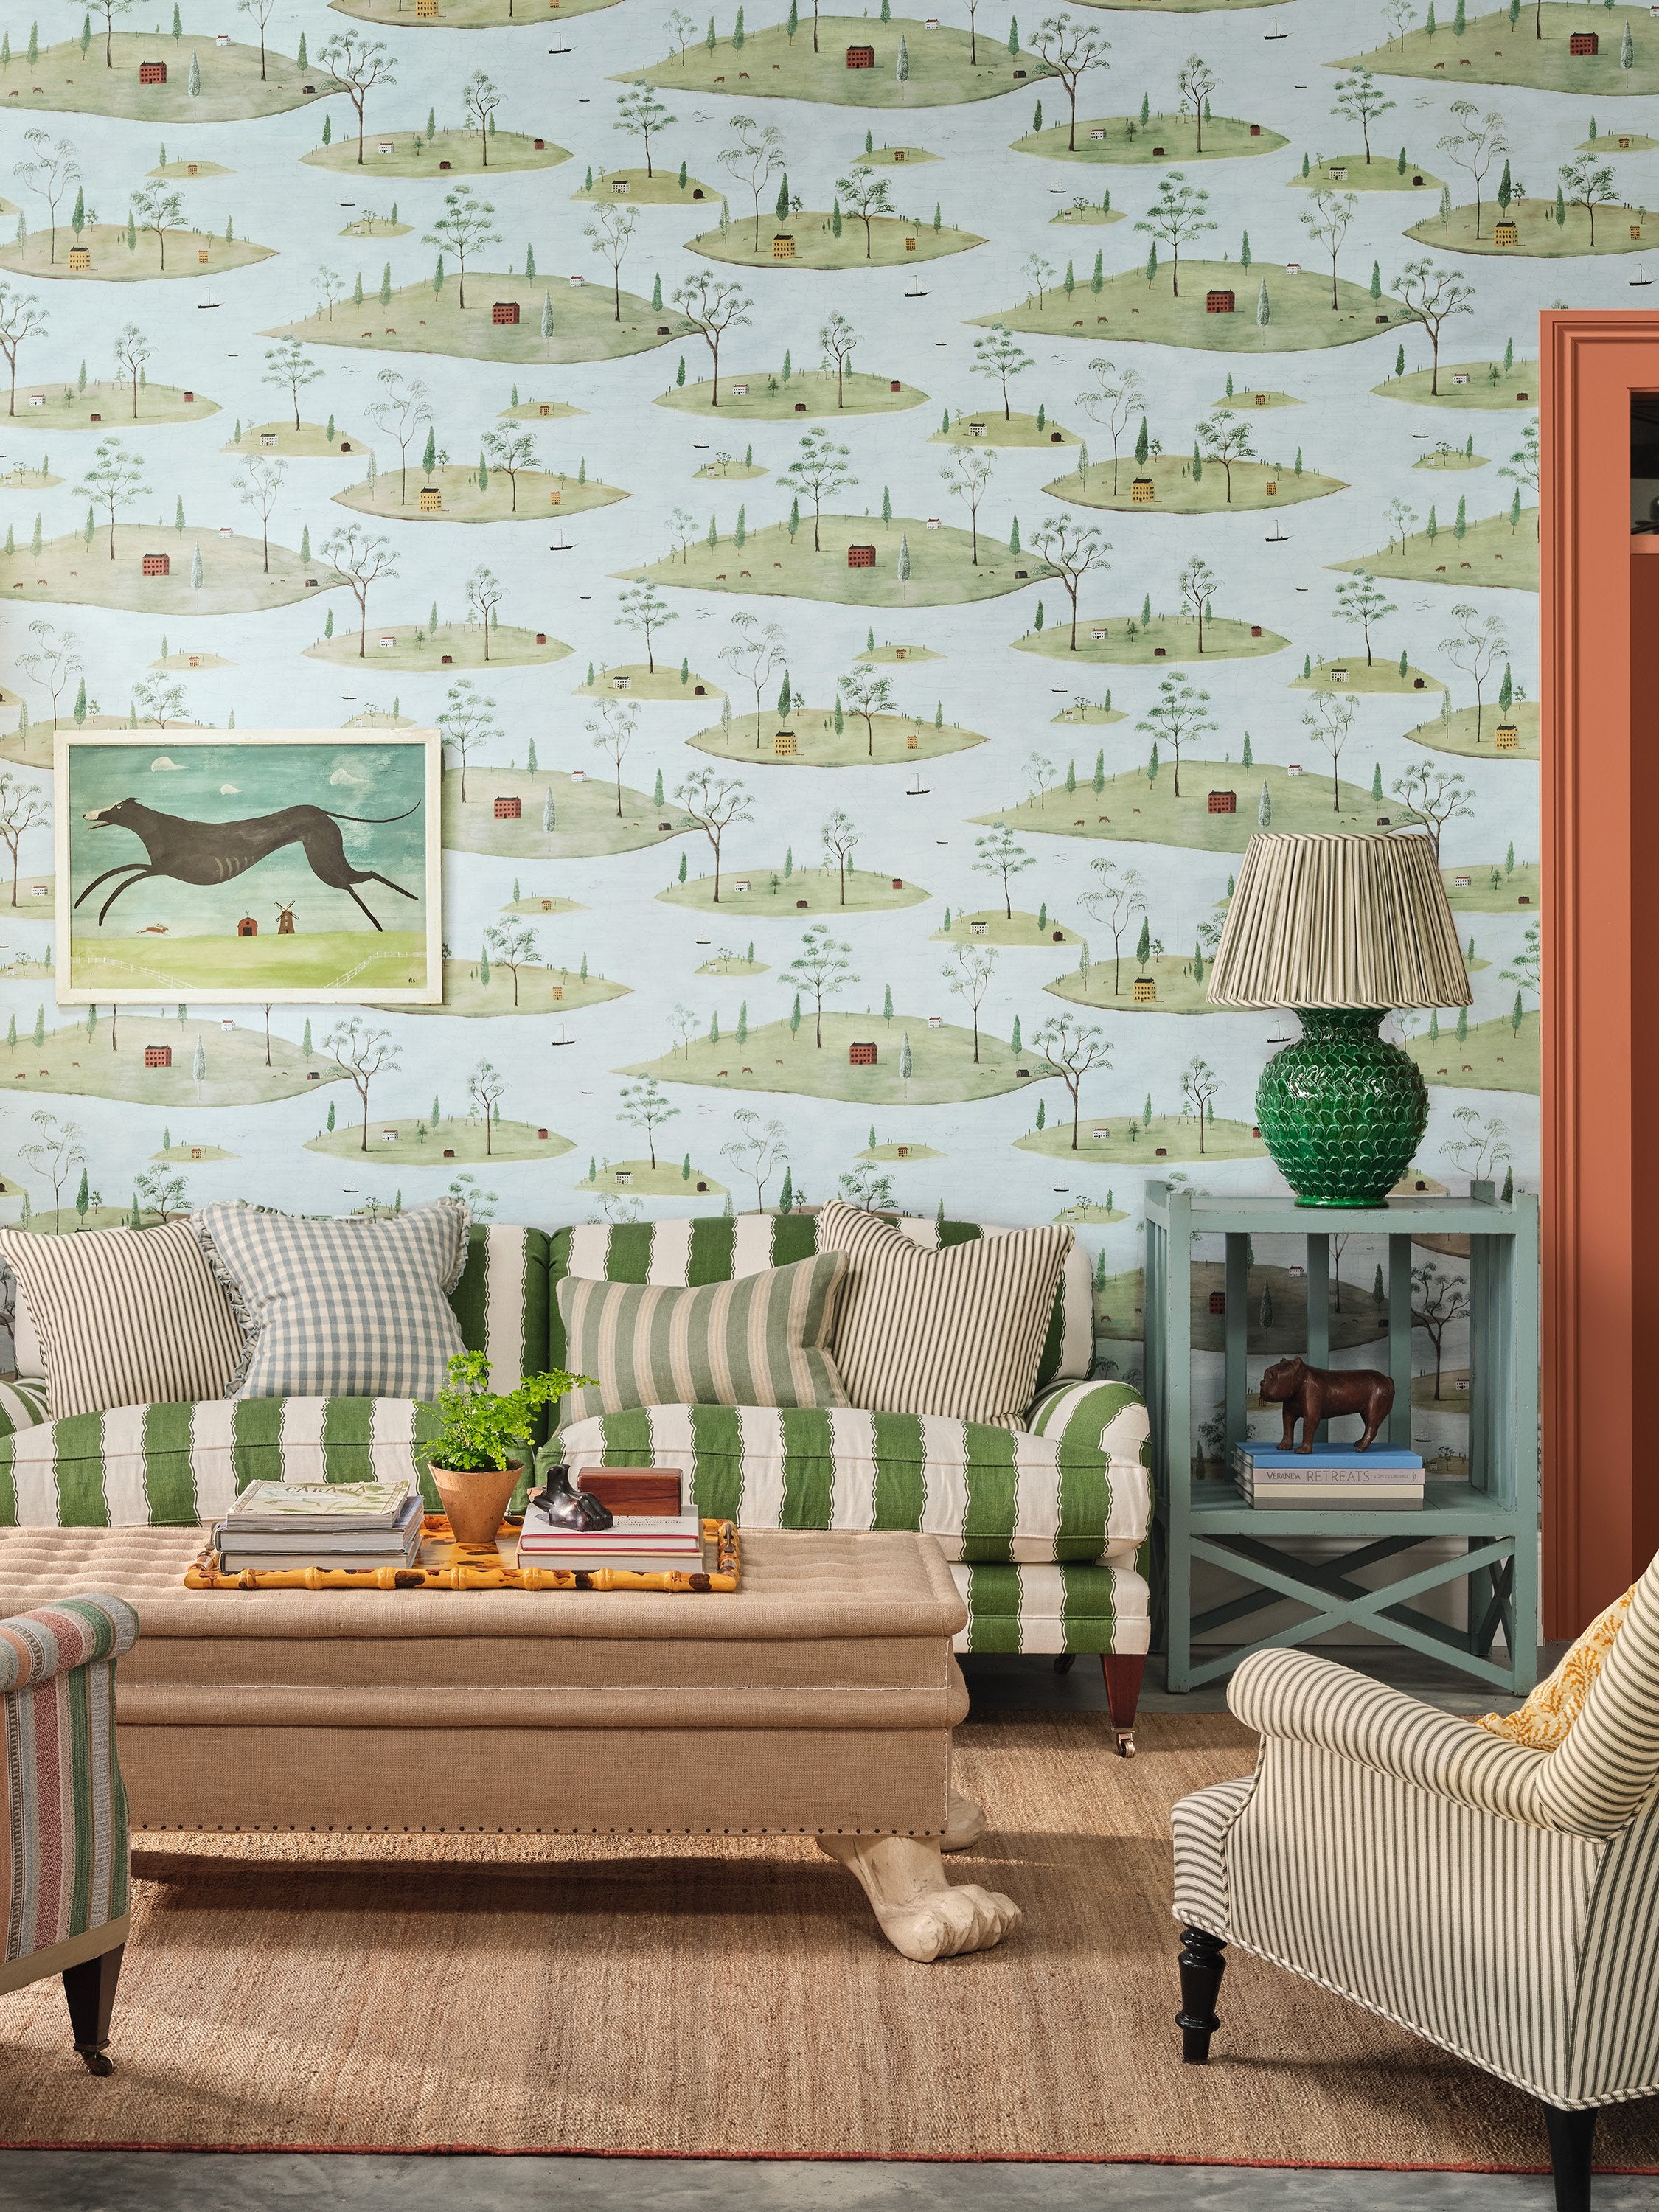 Harbour wallpaper with stripy sofa, side table, lamp and woven rug